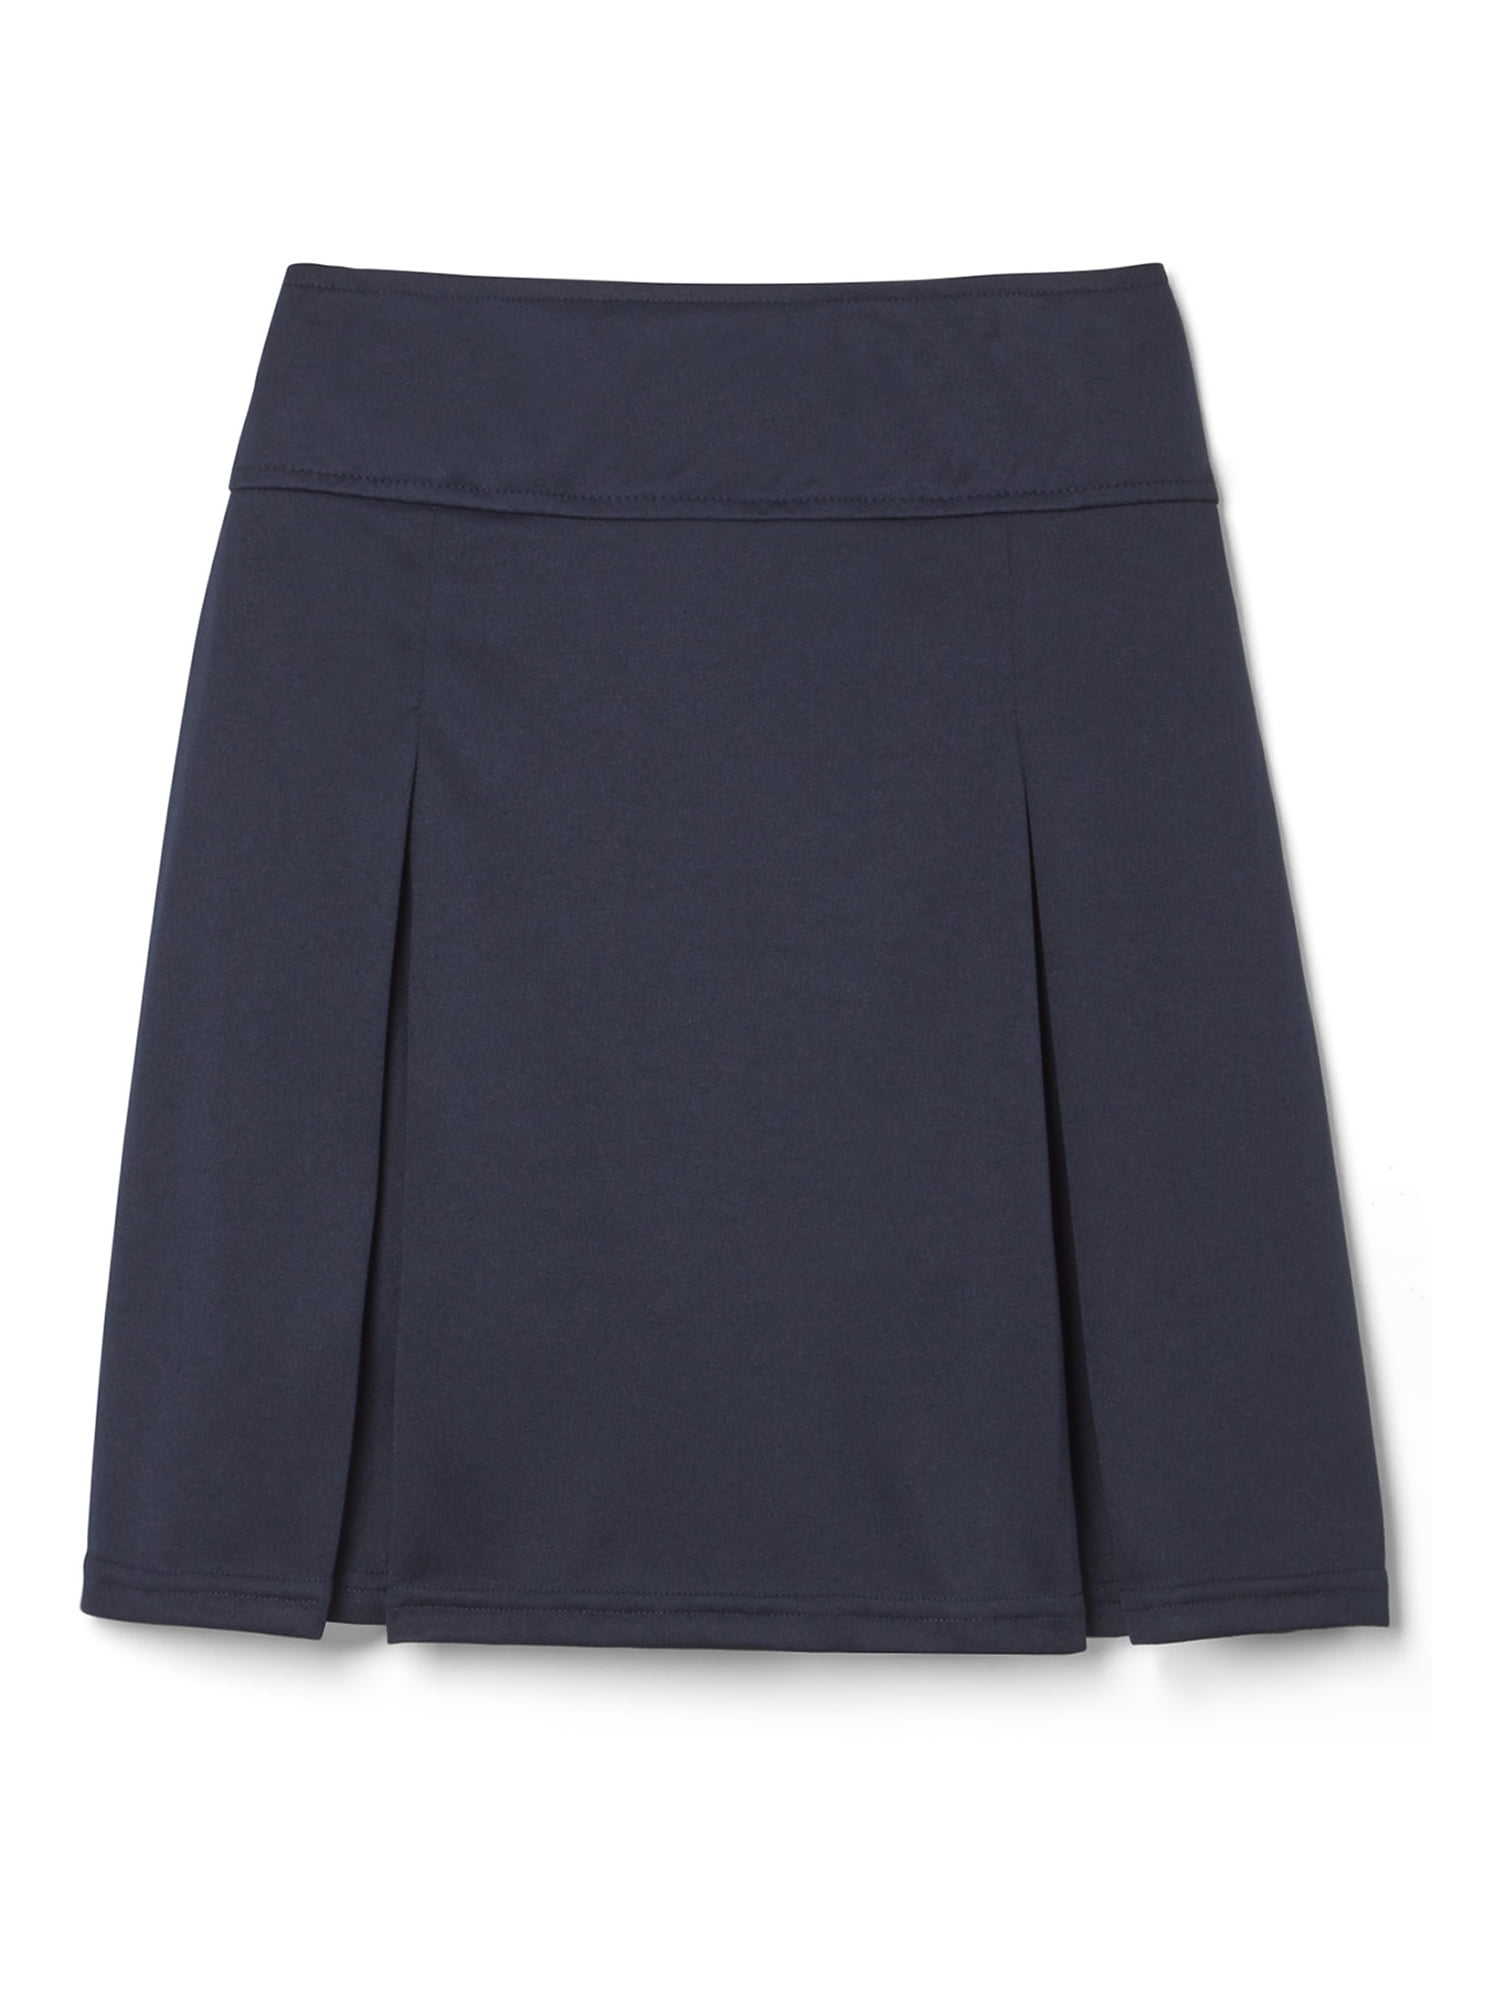 French Toast Girls Navy Blue Pleated Skirt Size 7-20 Official School Wear 